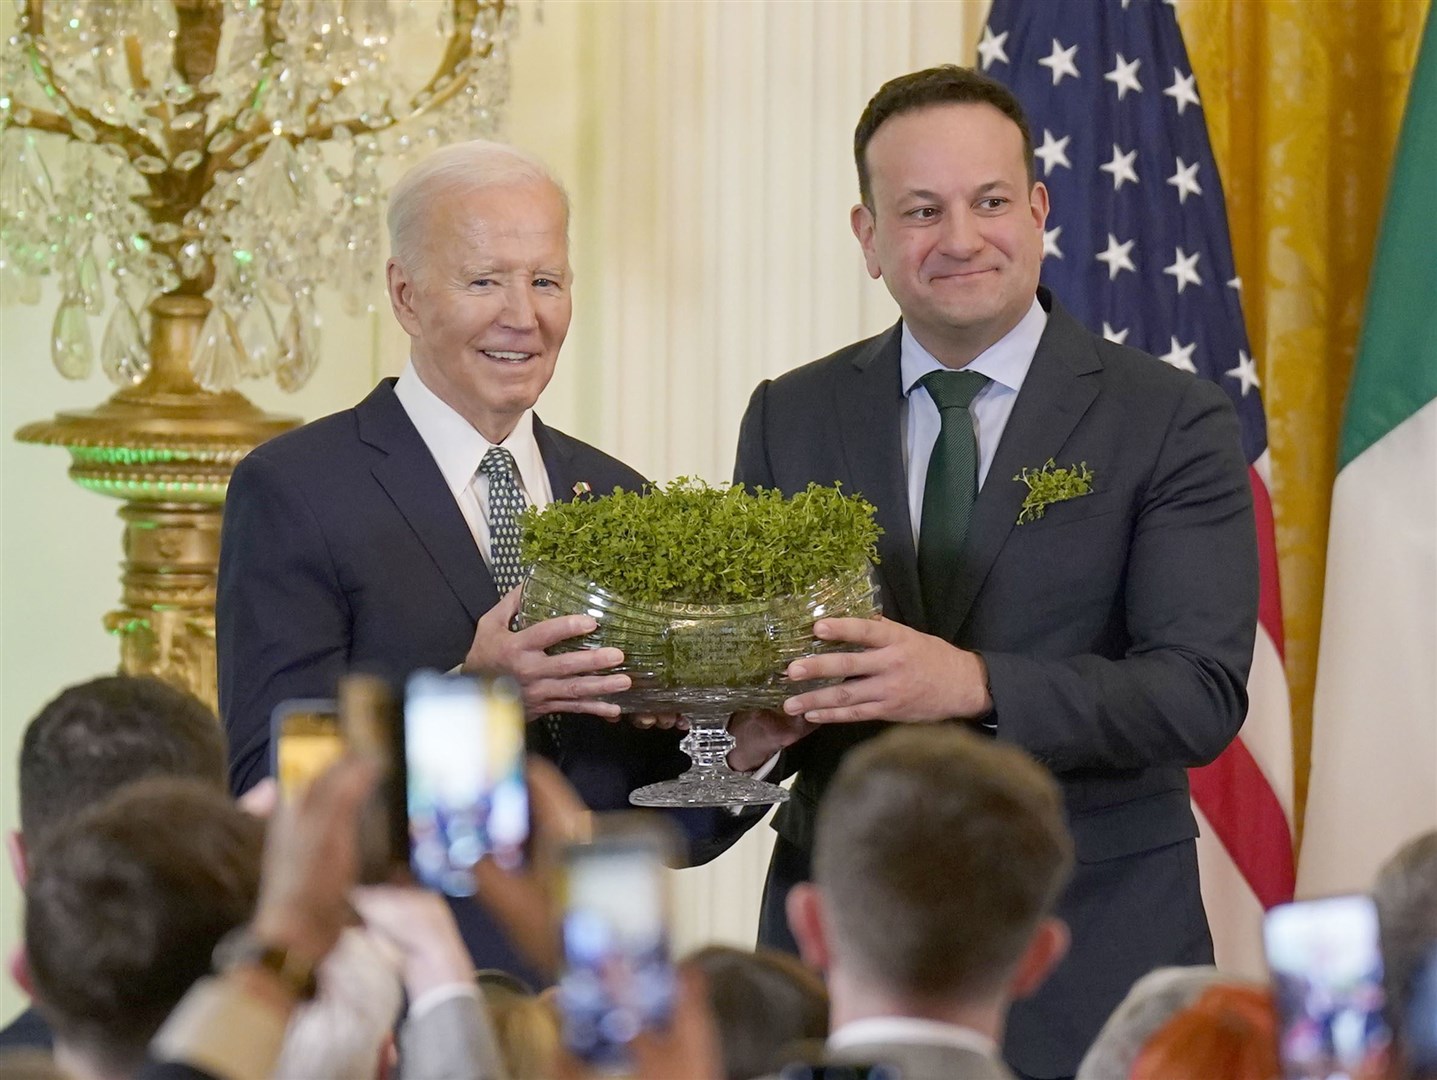 Taoiseach Leo Varadkar and US President Joe Biden during the St Patrick’s Day Reception and Shamrock Ceremony in the East Room of the White House, Washington DC, during his visit to the US for St Patrick’s Day (Niall Carson/PA)